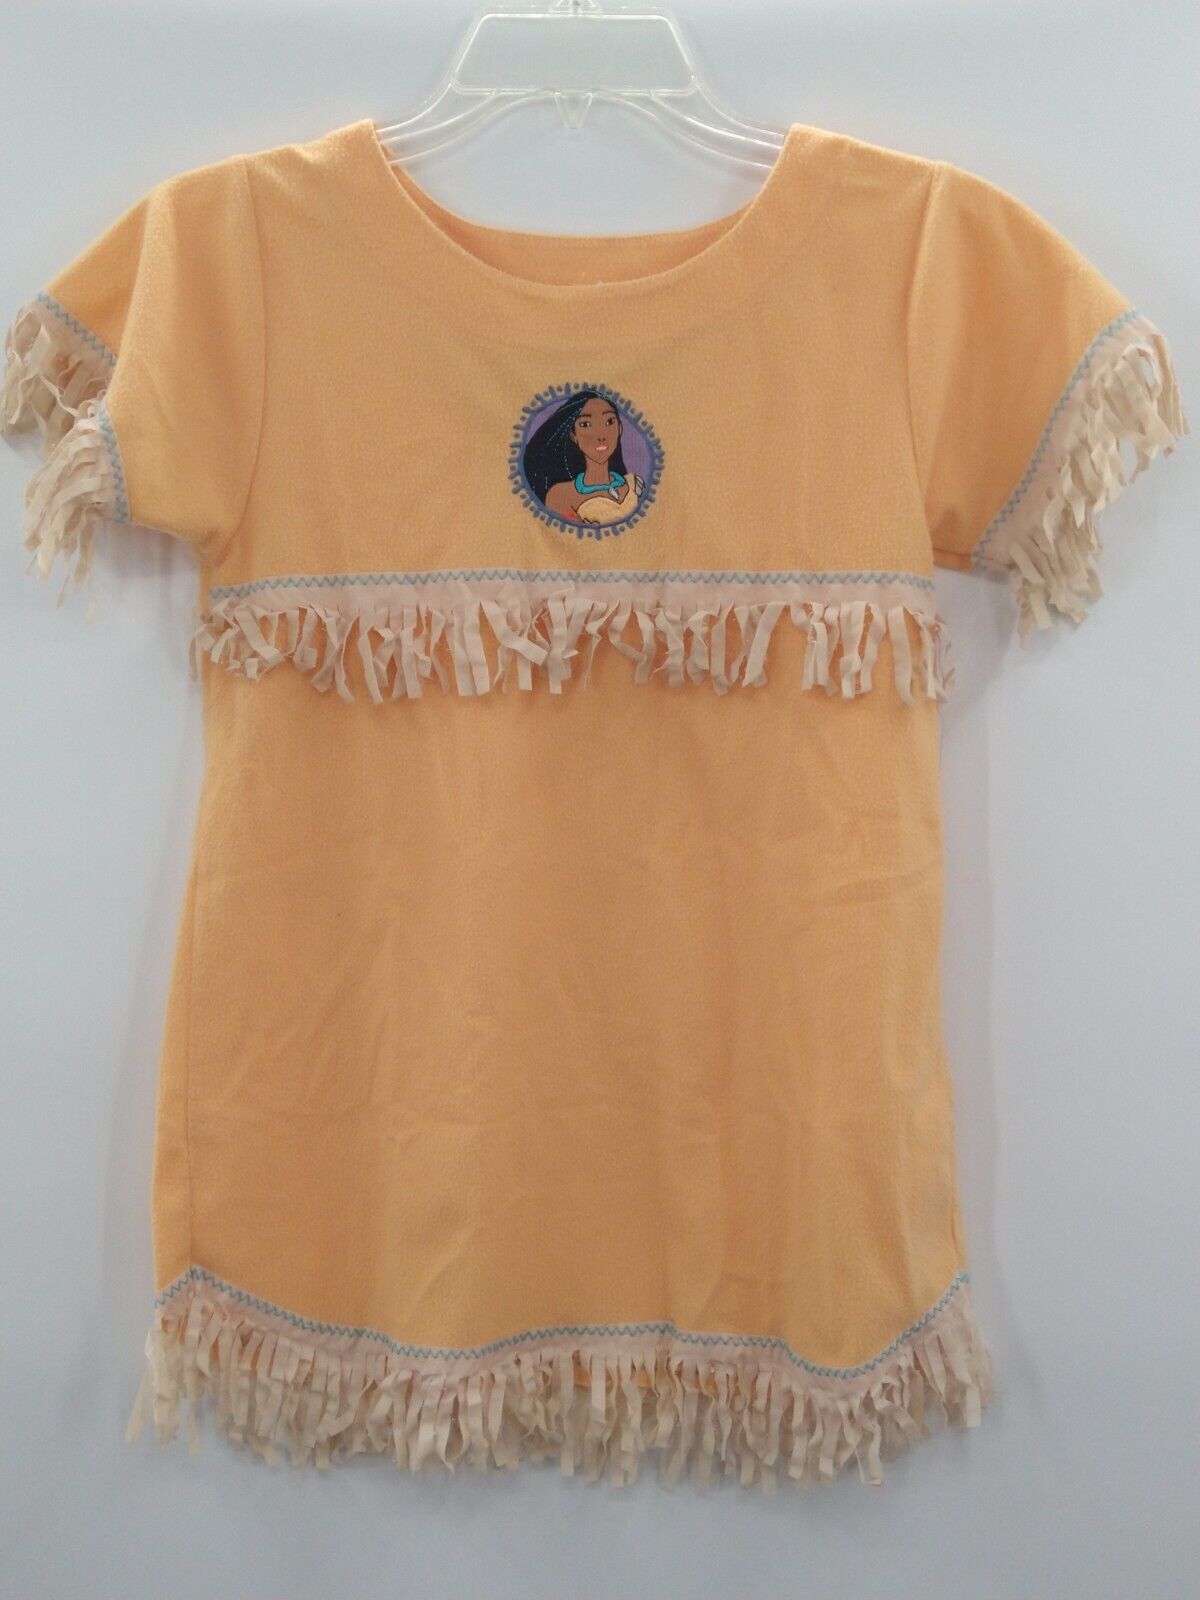 Vintage Child Pocahontas Disney Dress fun factory fringed costume embroidered 6X